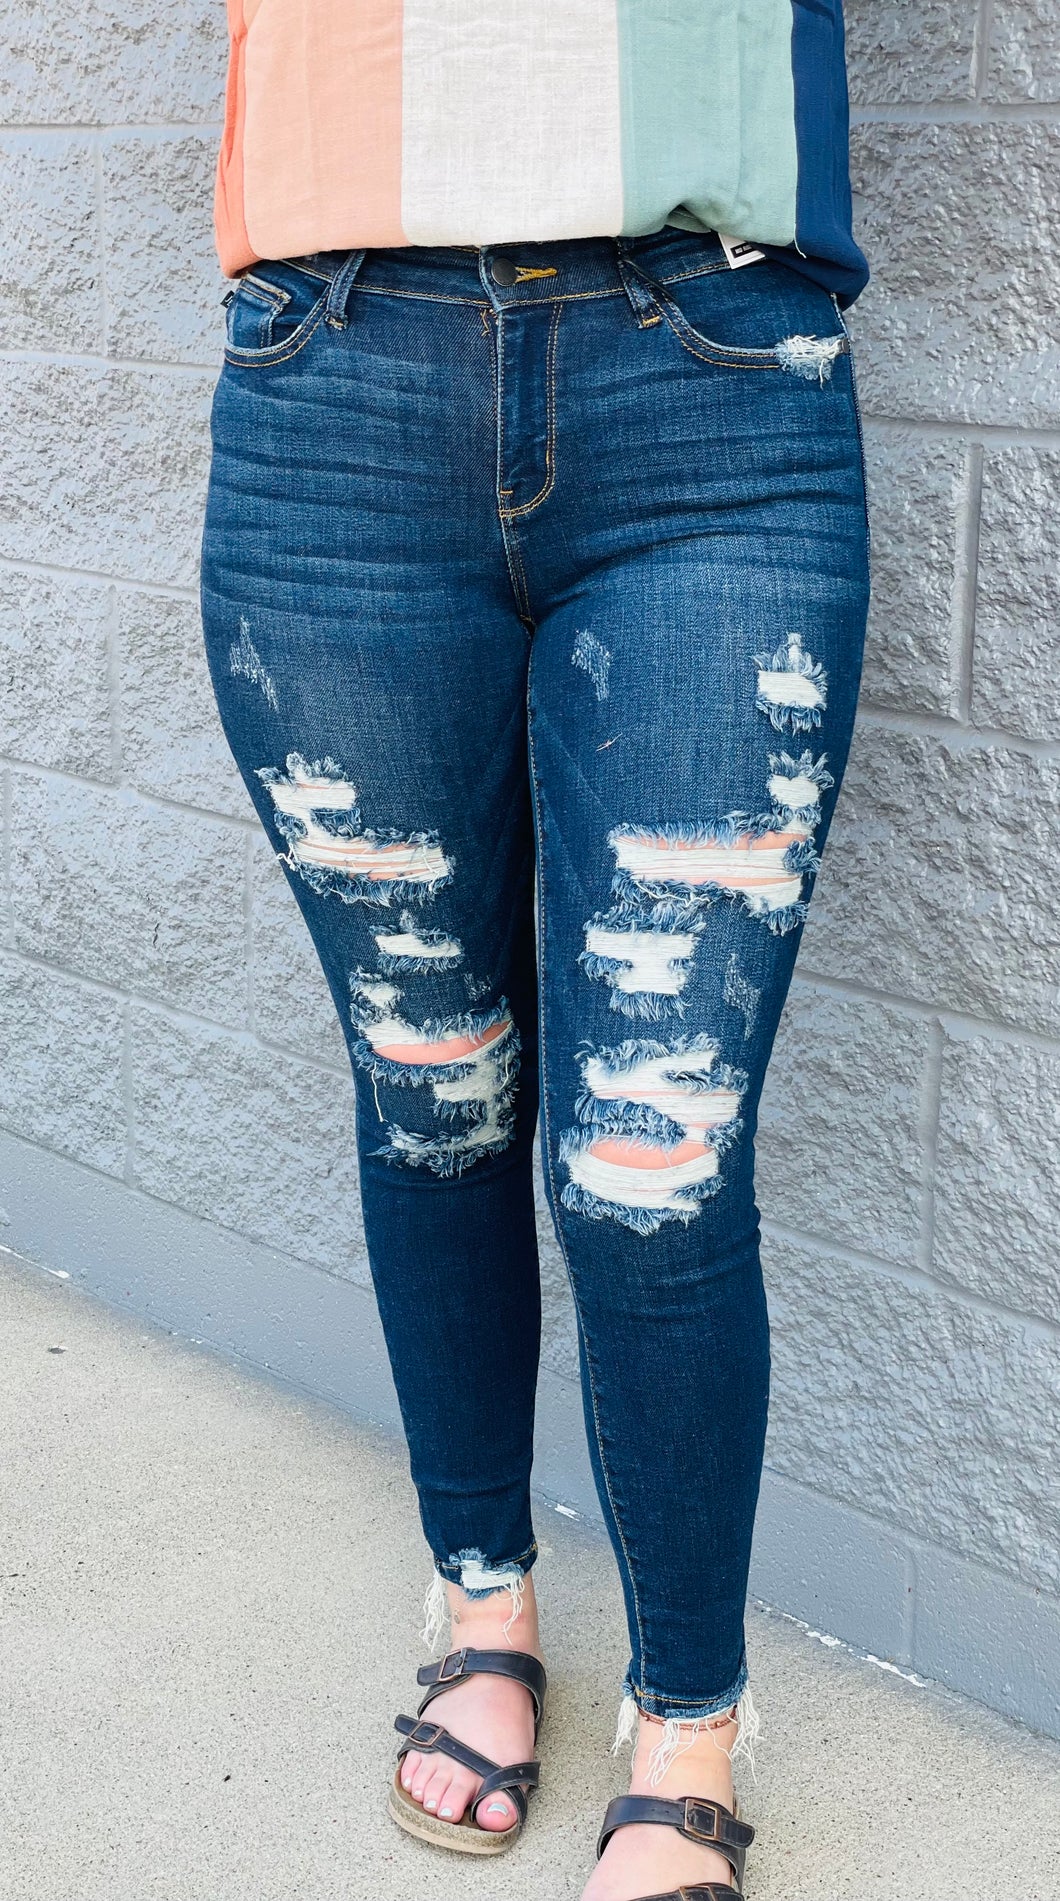 Judy Blue Mid-Rise Destroyed Skinny Jeans